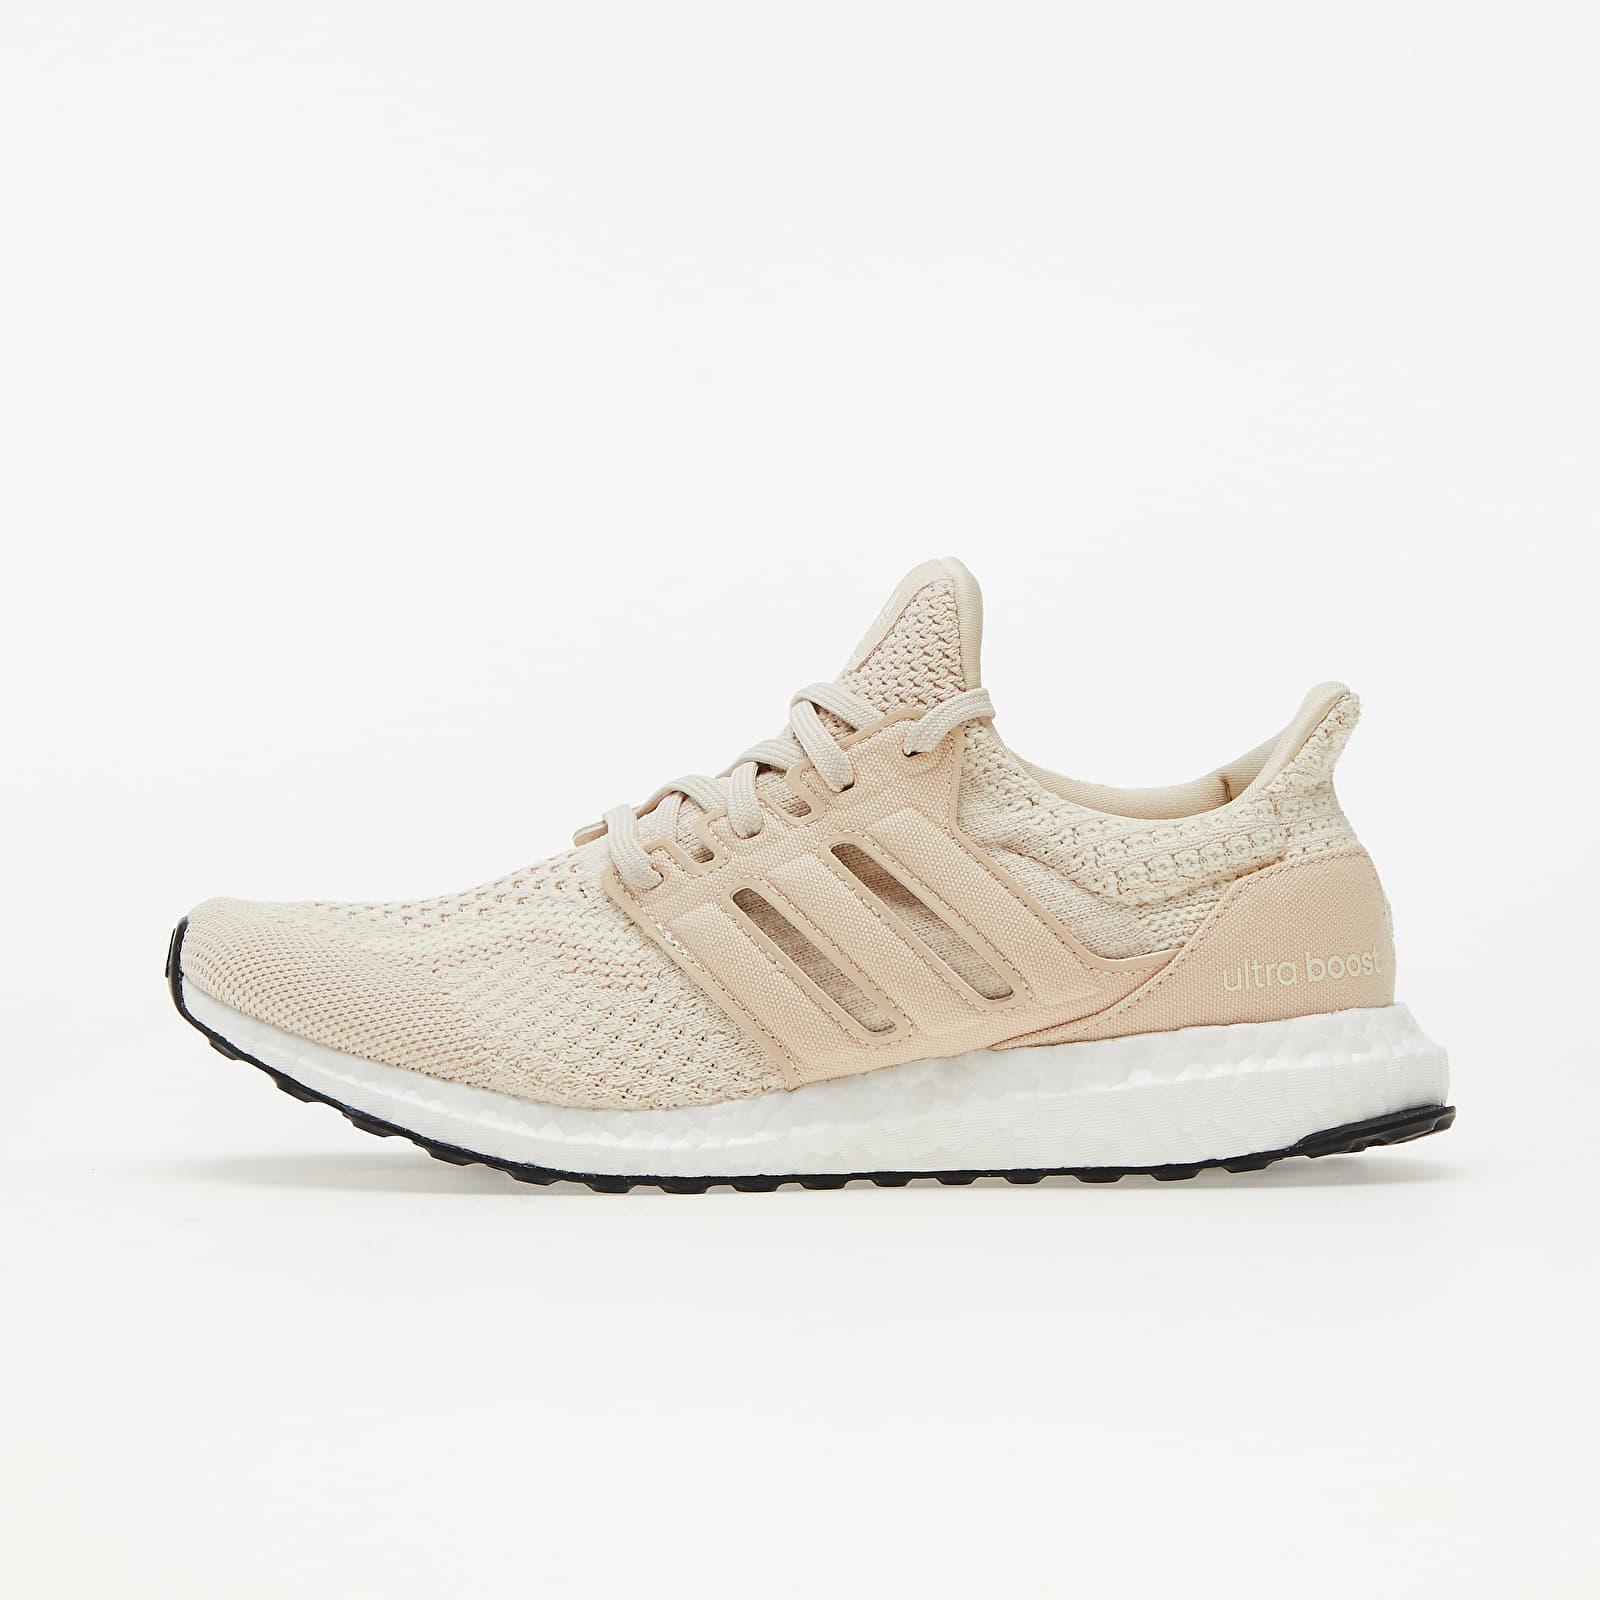 adidas Originals Adidas Ultraboost 5.0 Dna Halo Ivory/ Halo Ivory/ Core  White in Natural | Lyst